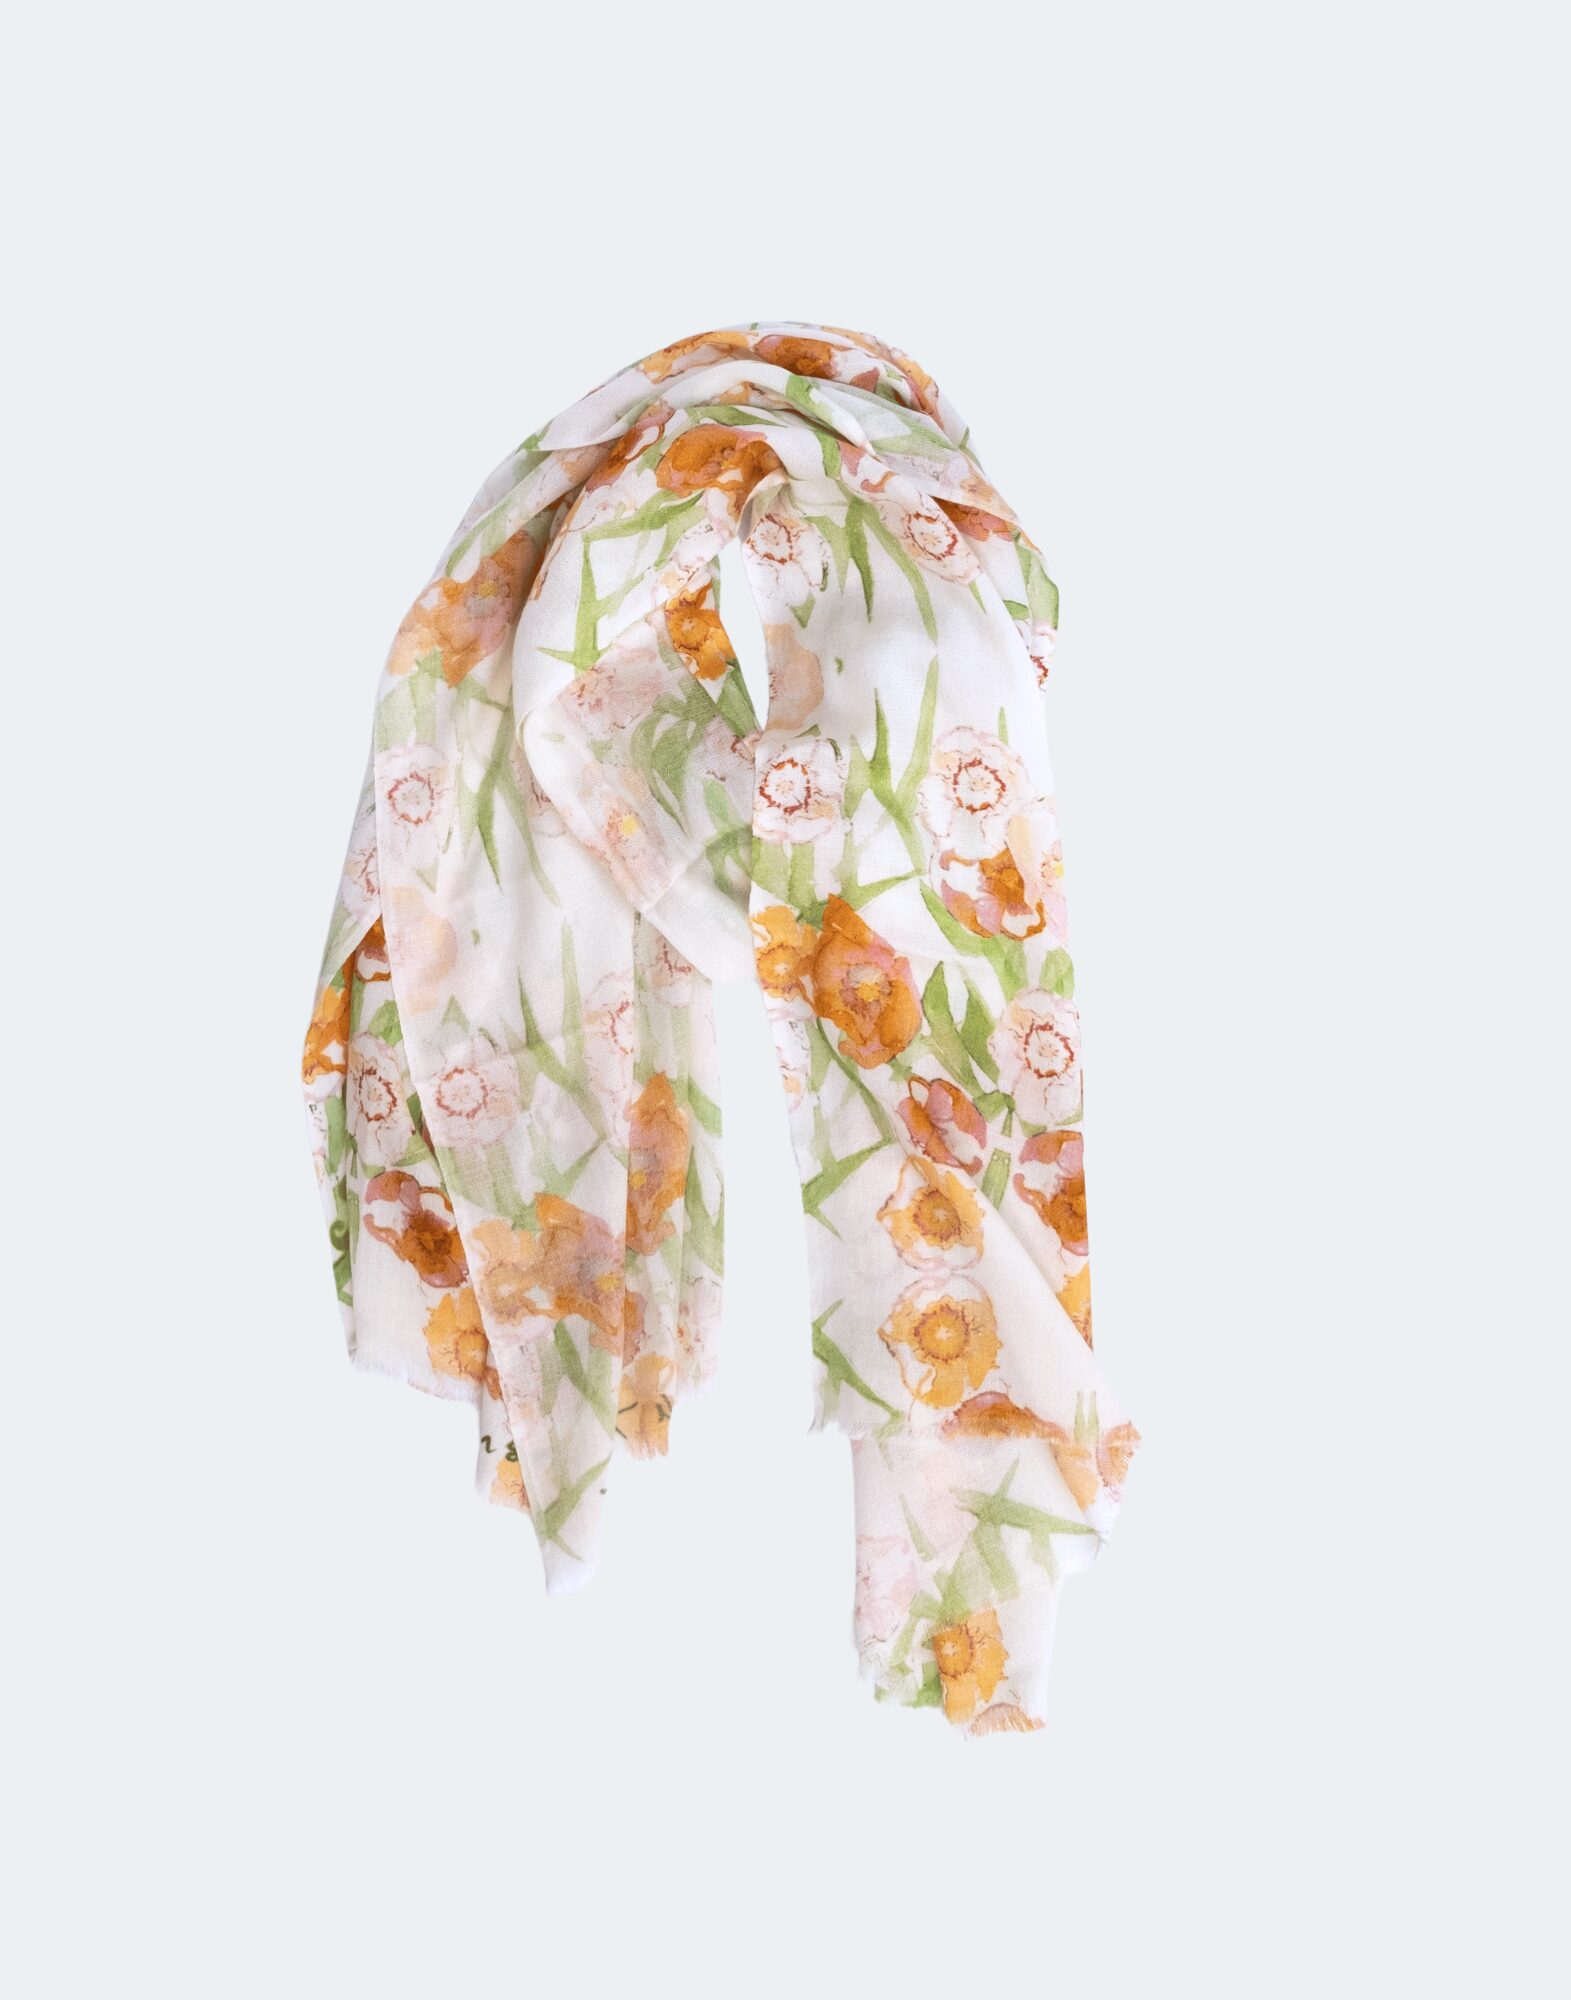 scarf covered in tulips of pale oranges, pinks, and greens